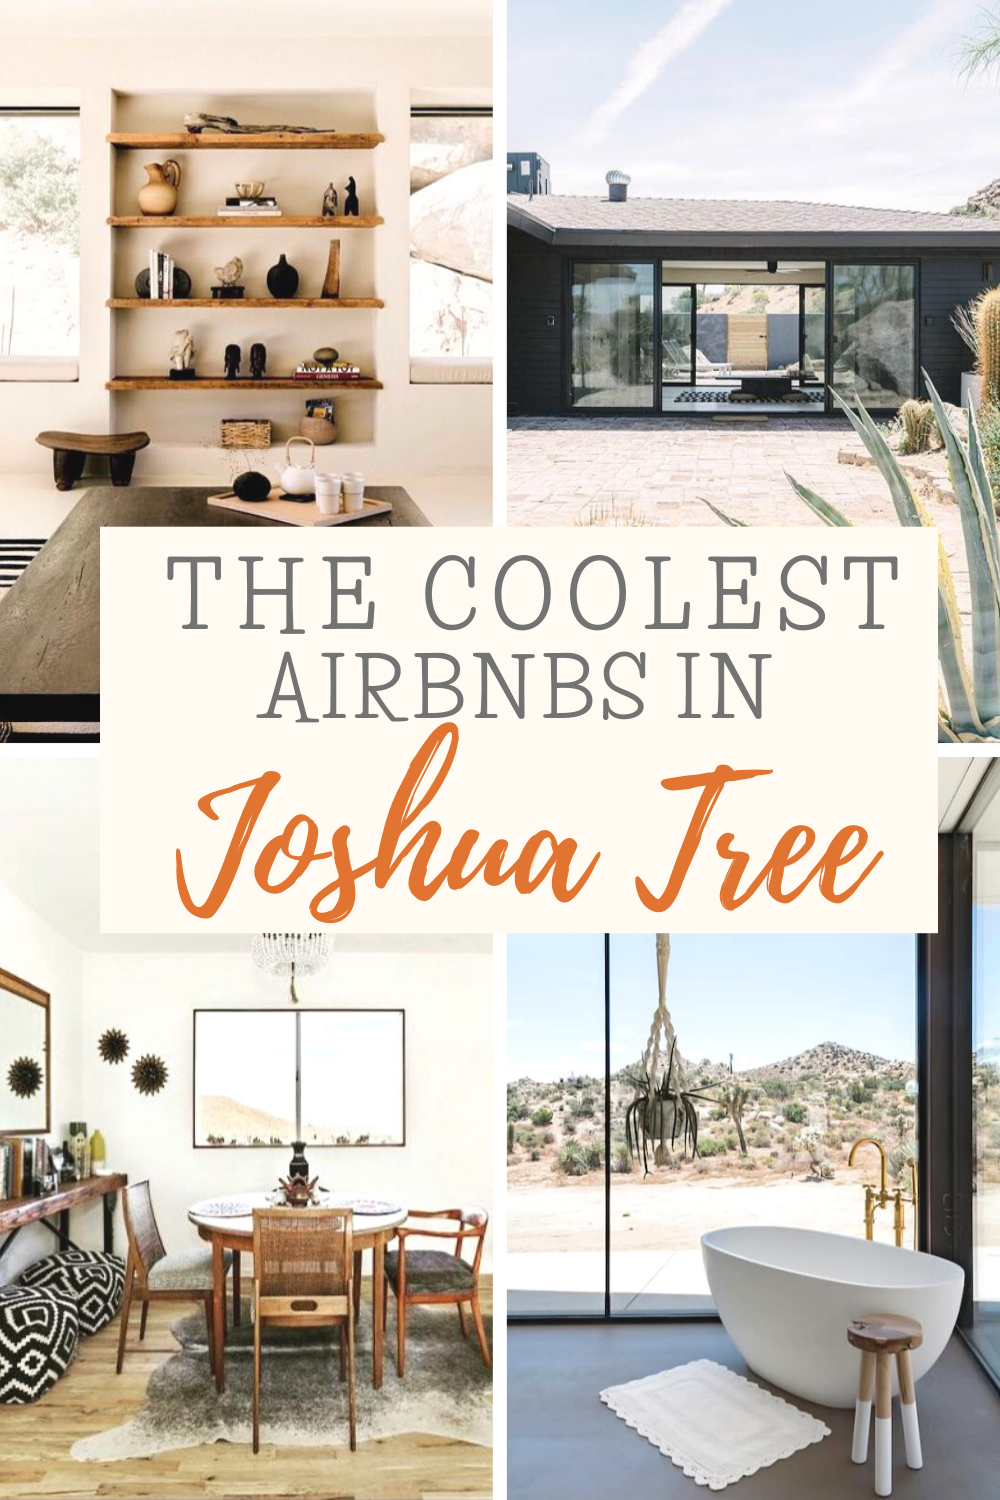 the coolest airbnbs in Joshua Tree